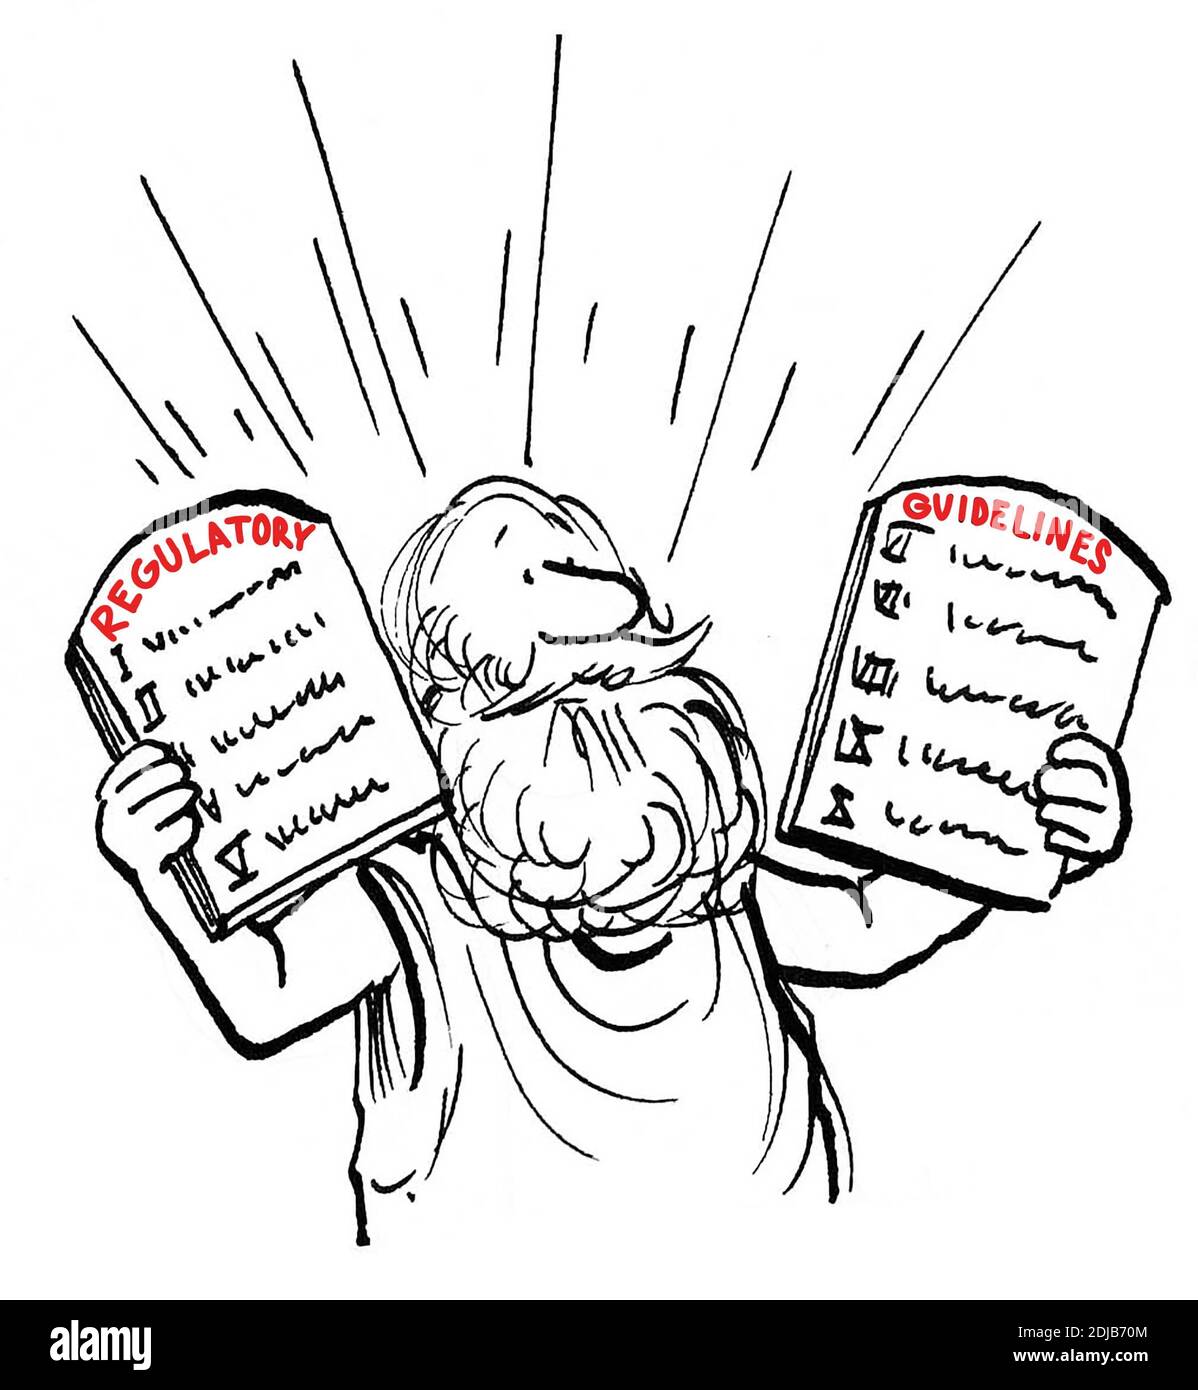 Moses holds up new federal regulation guidelines. Stock Photo